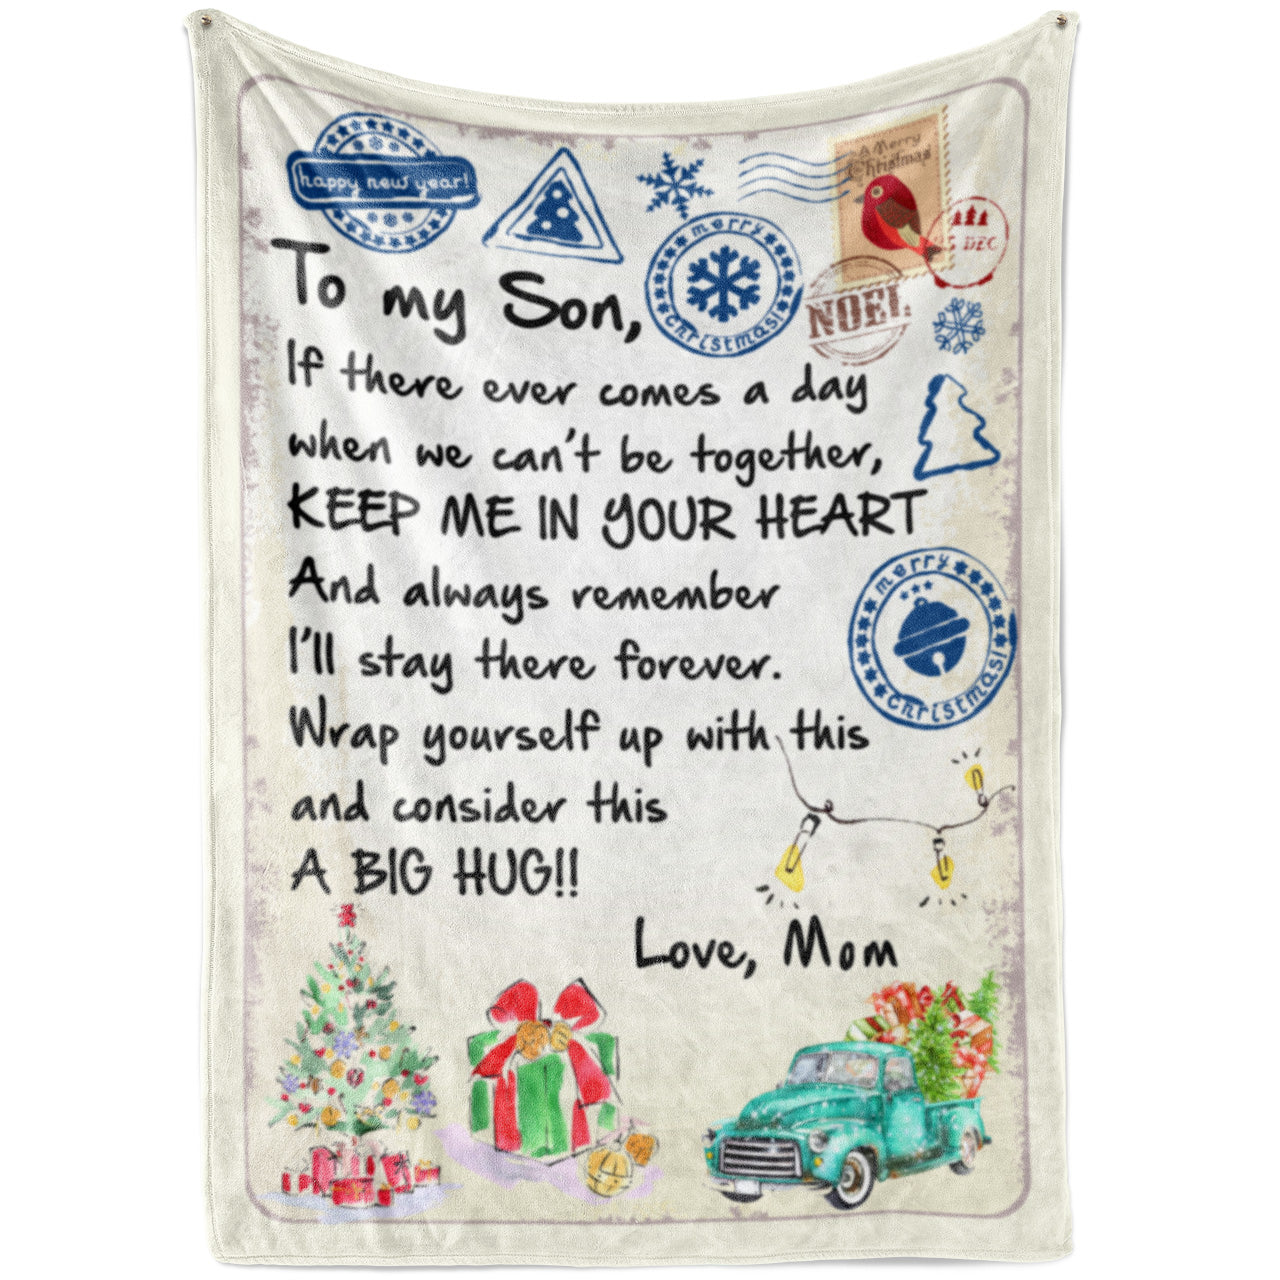 Blanket Gift ideas For Son, Sentimental Gifts For My Son, Keep Me In Your Heart